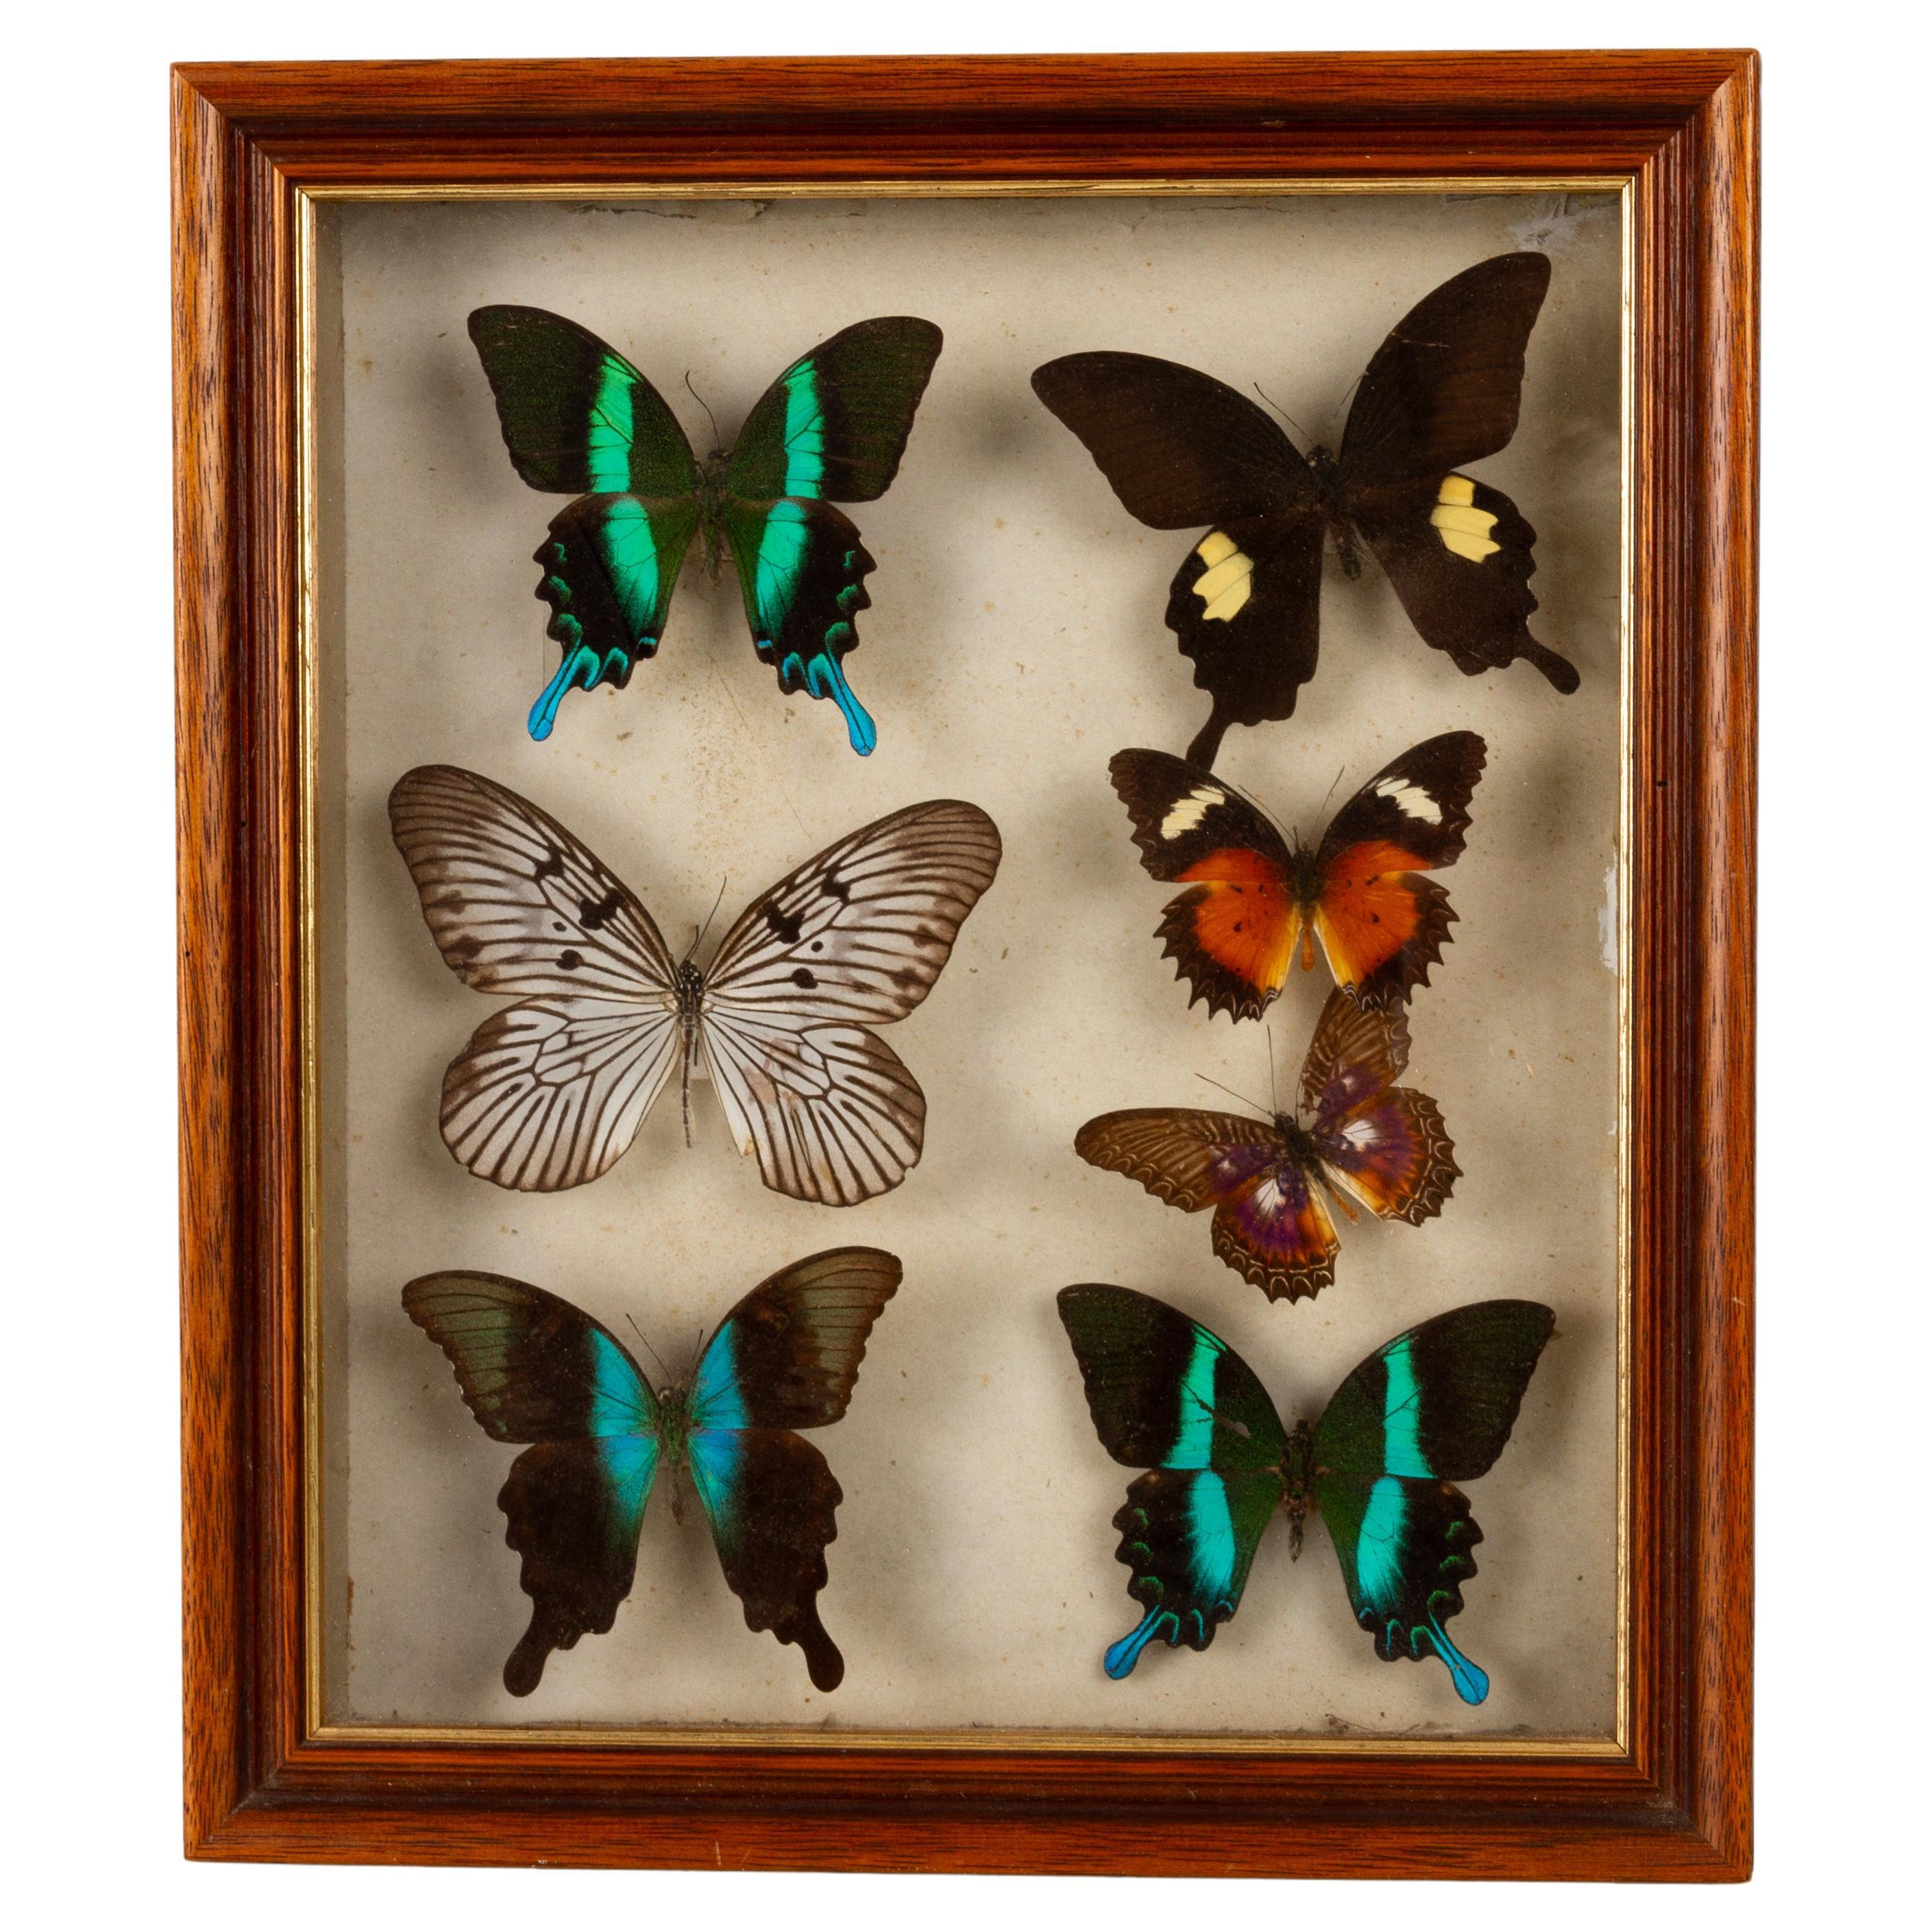 East Indonesian Exotic Butterflies Taxidermy Display Celebes Islands